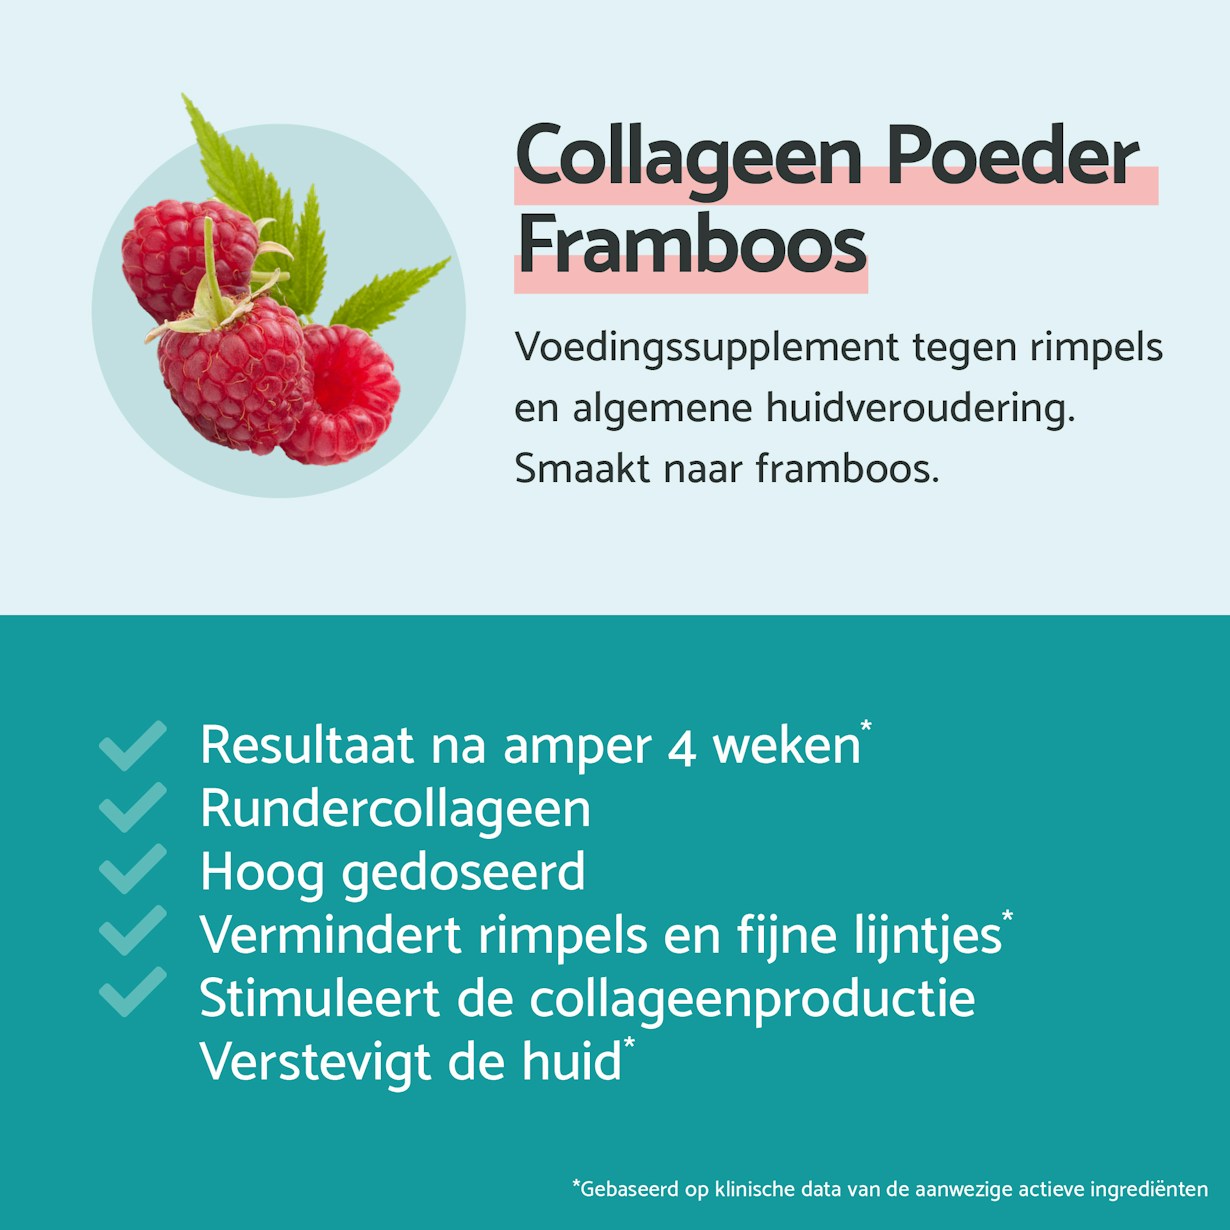 Remescar pdp pictures website and amazon 2000x2000px collagen powder raspberry2